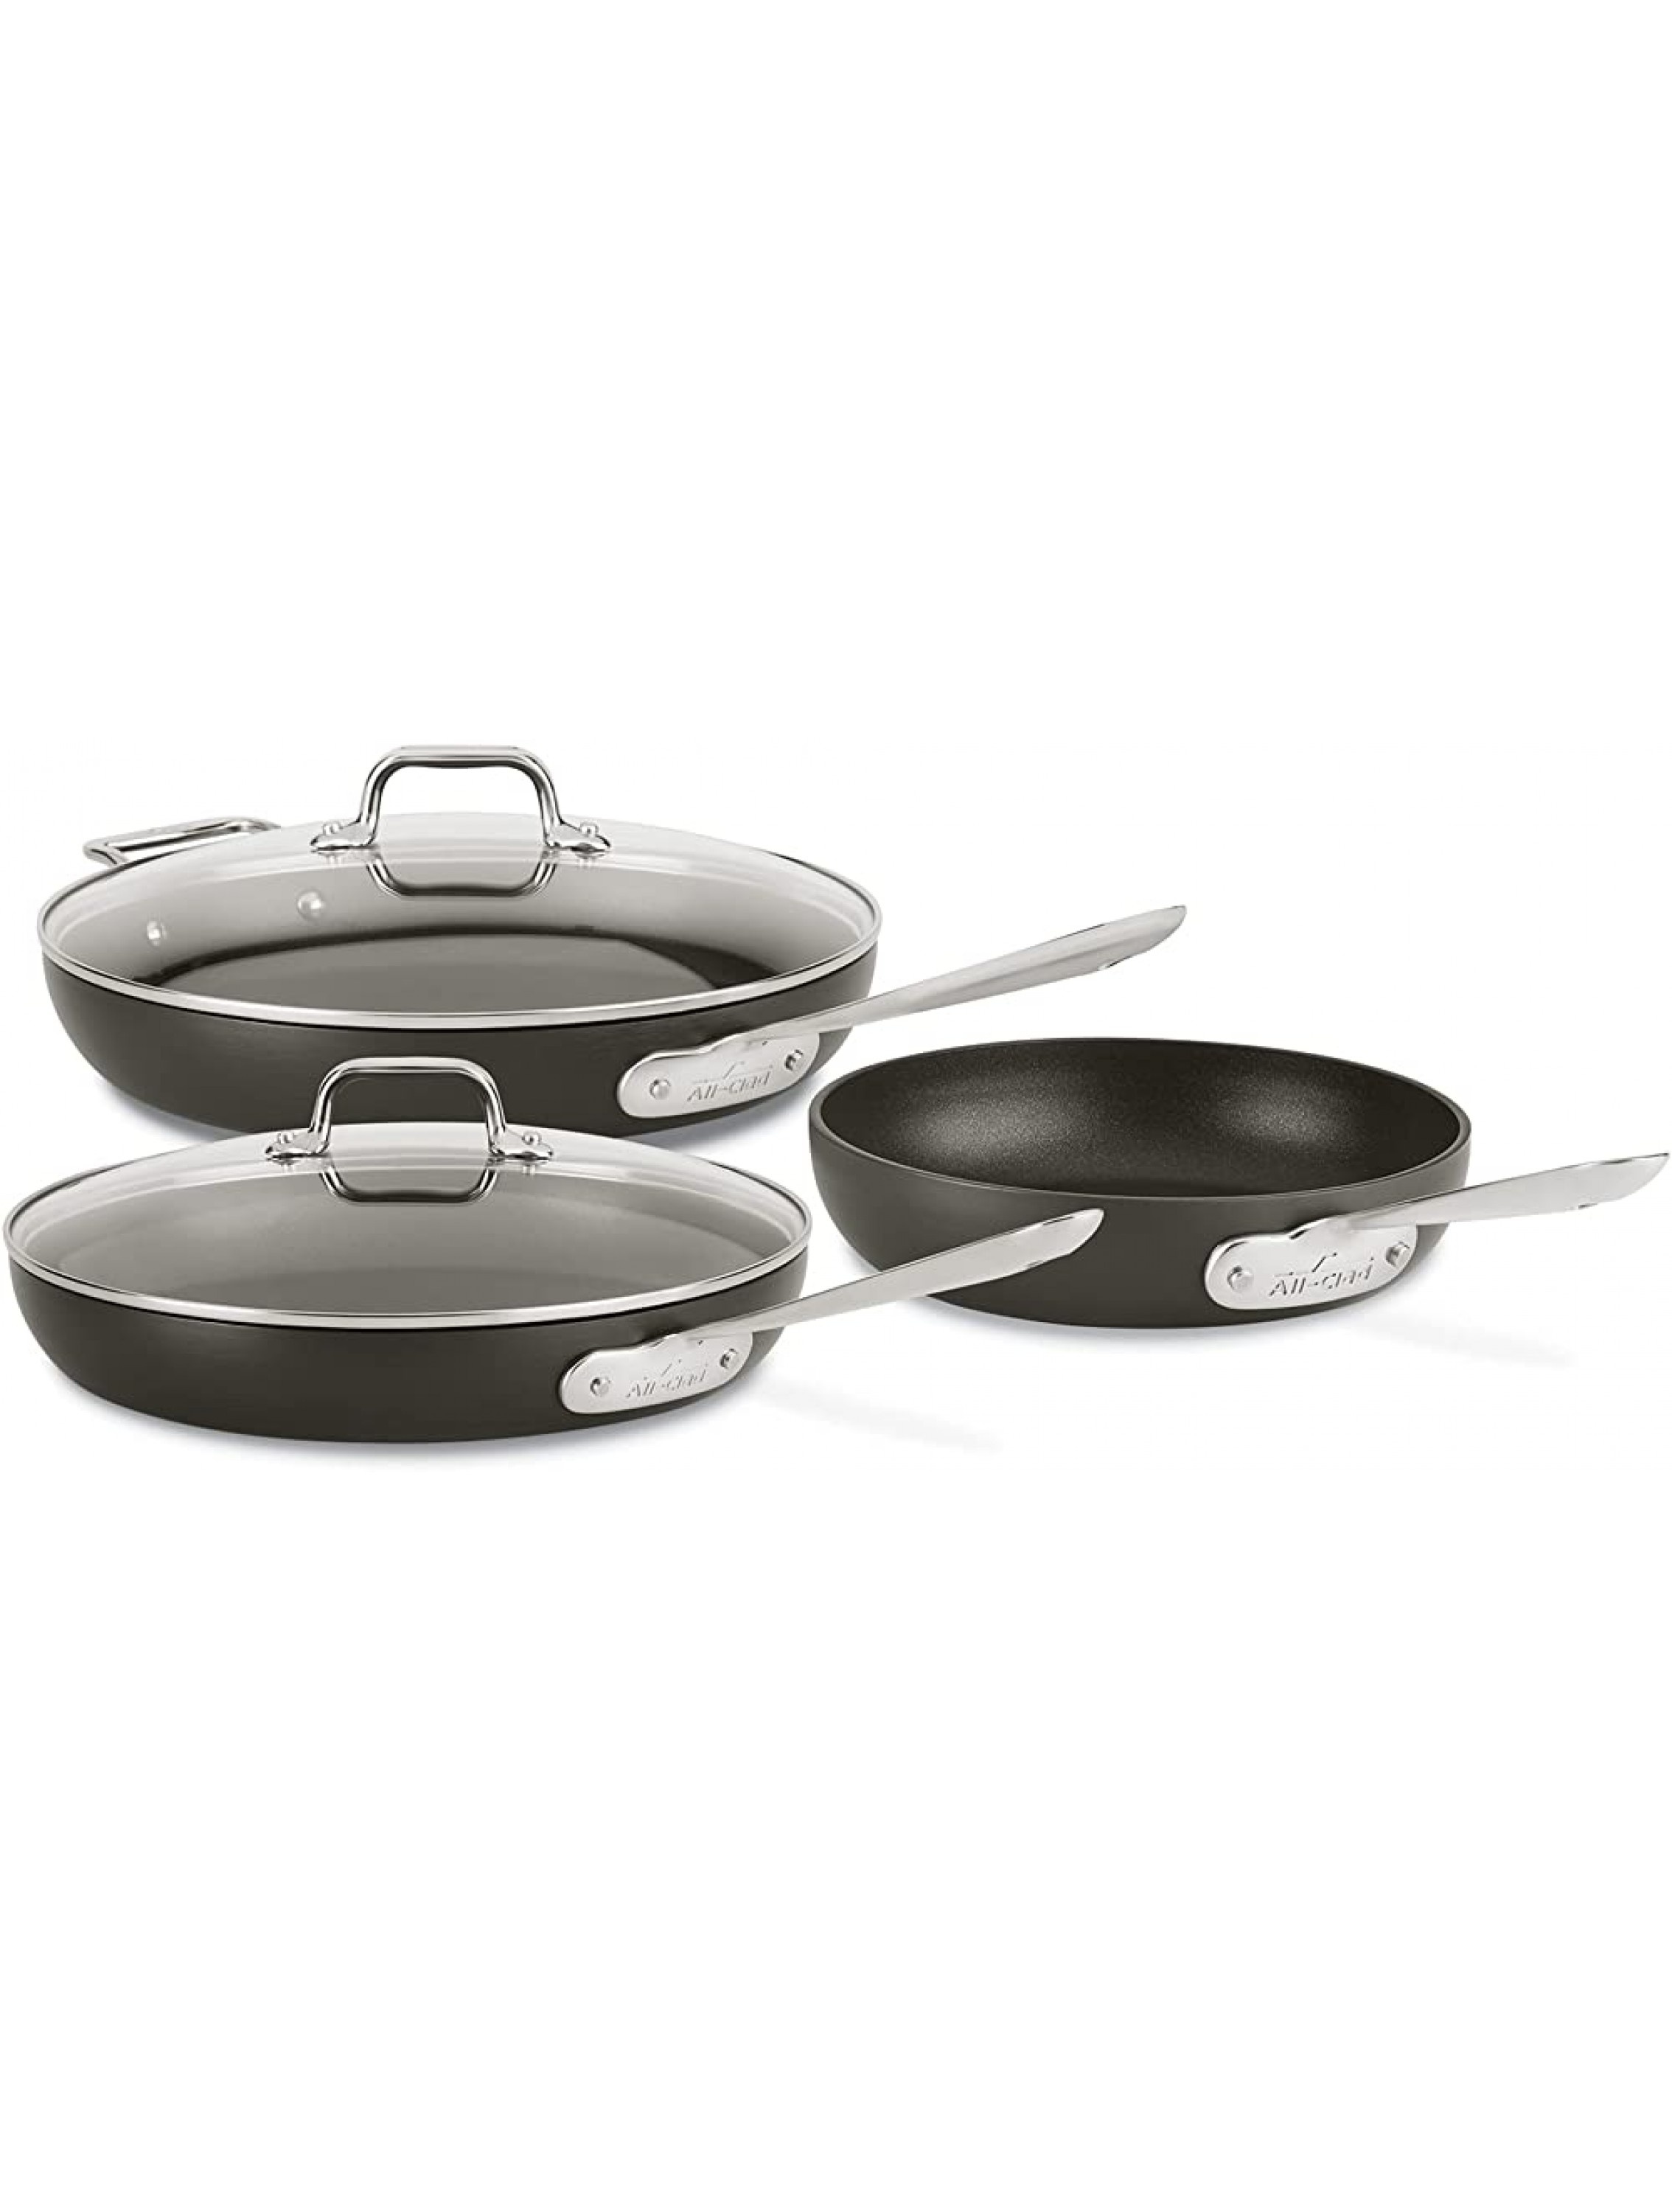 All-Clad HA1 Nonstick Hard Anodized Cookware Set 5 piece Black - BLUKYY4UU